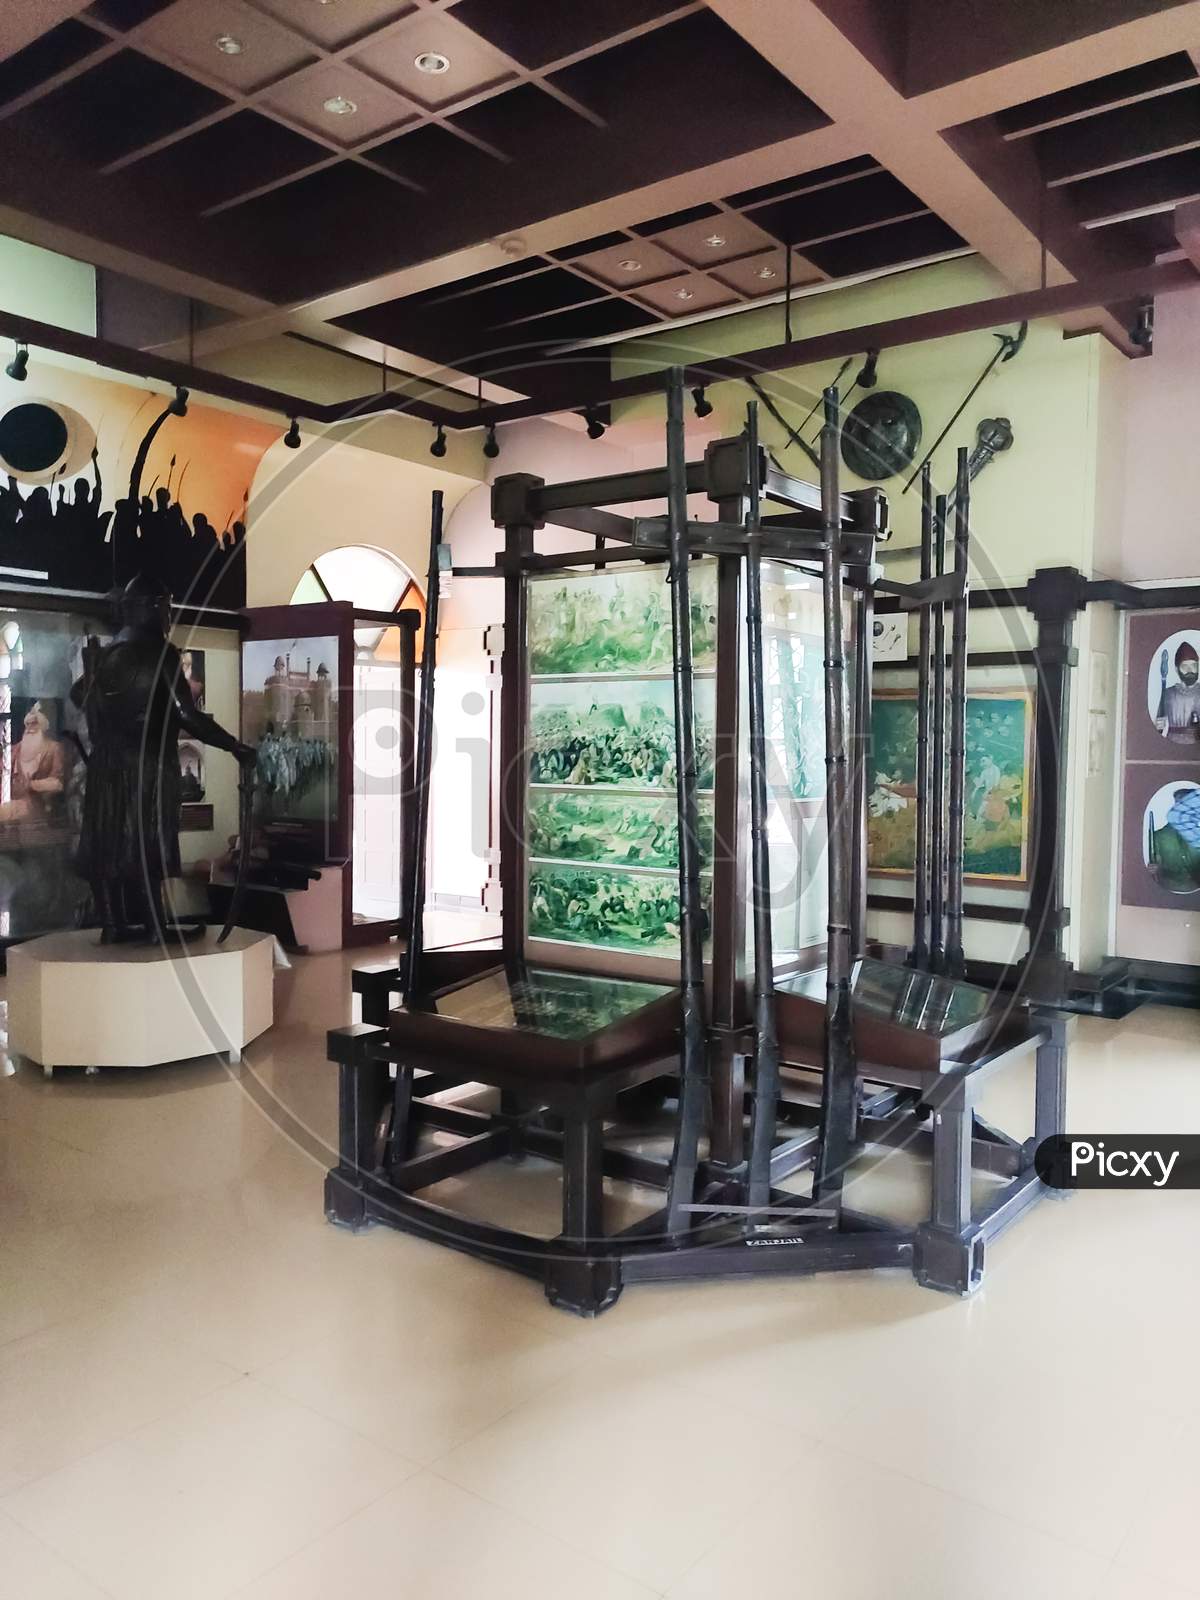 Ancient weapons of 17 century,ludhiana,india on 16 August 2019:rifle and sword,Maharaja Ranjit Singh War Museum established 1999.